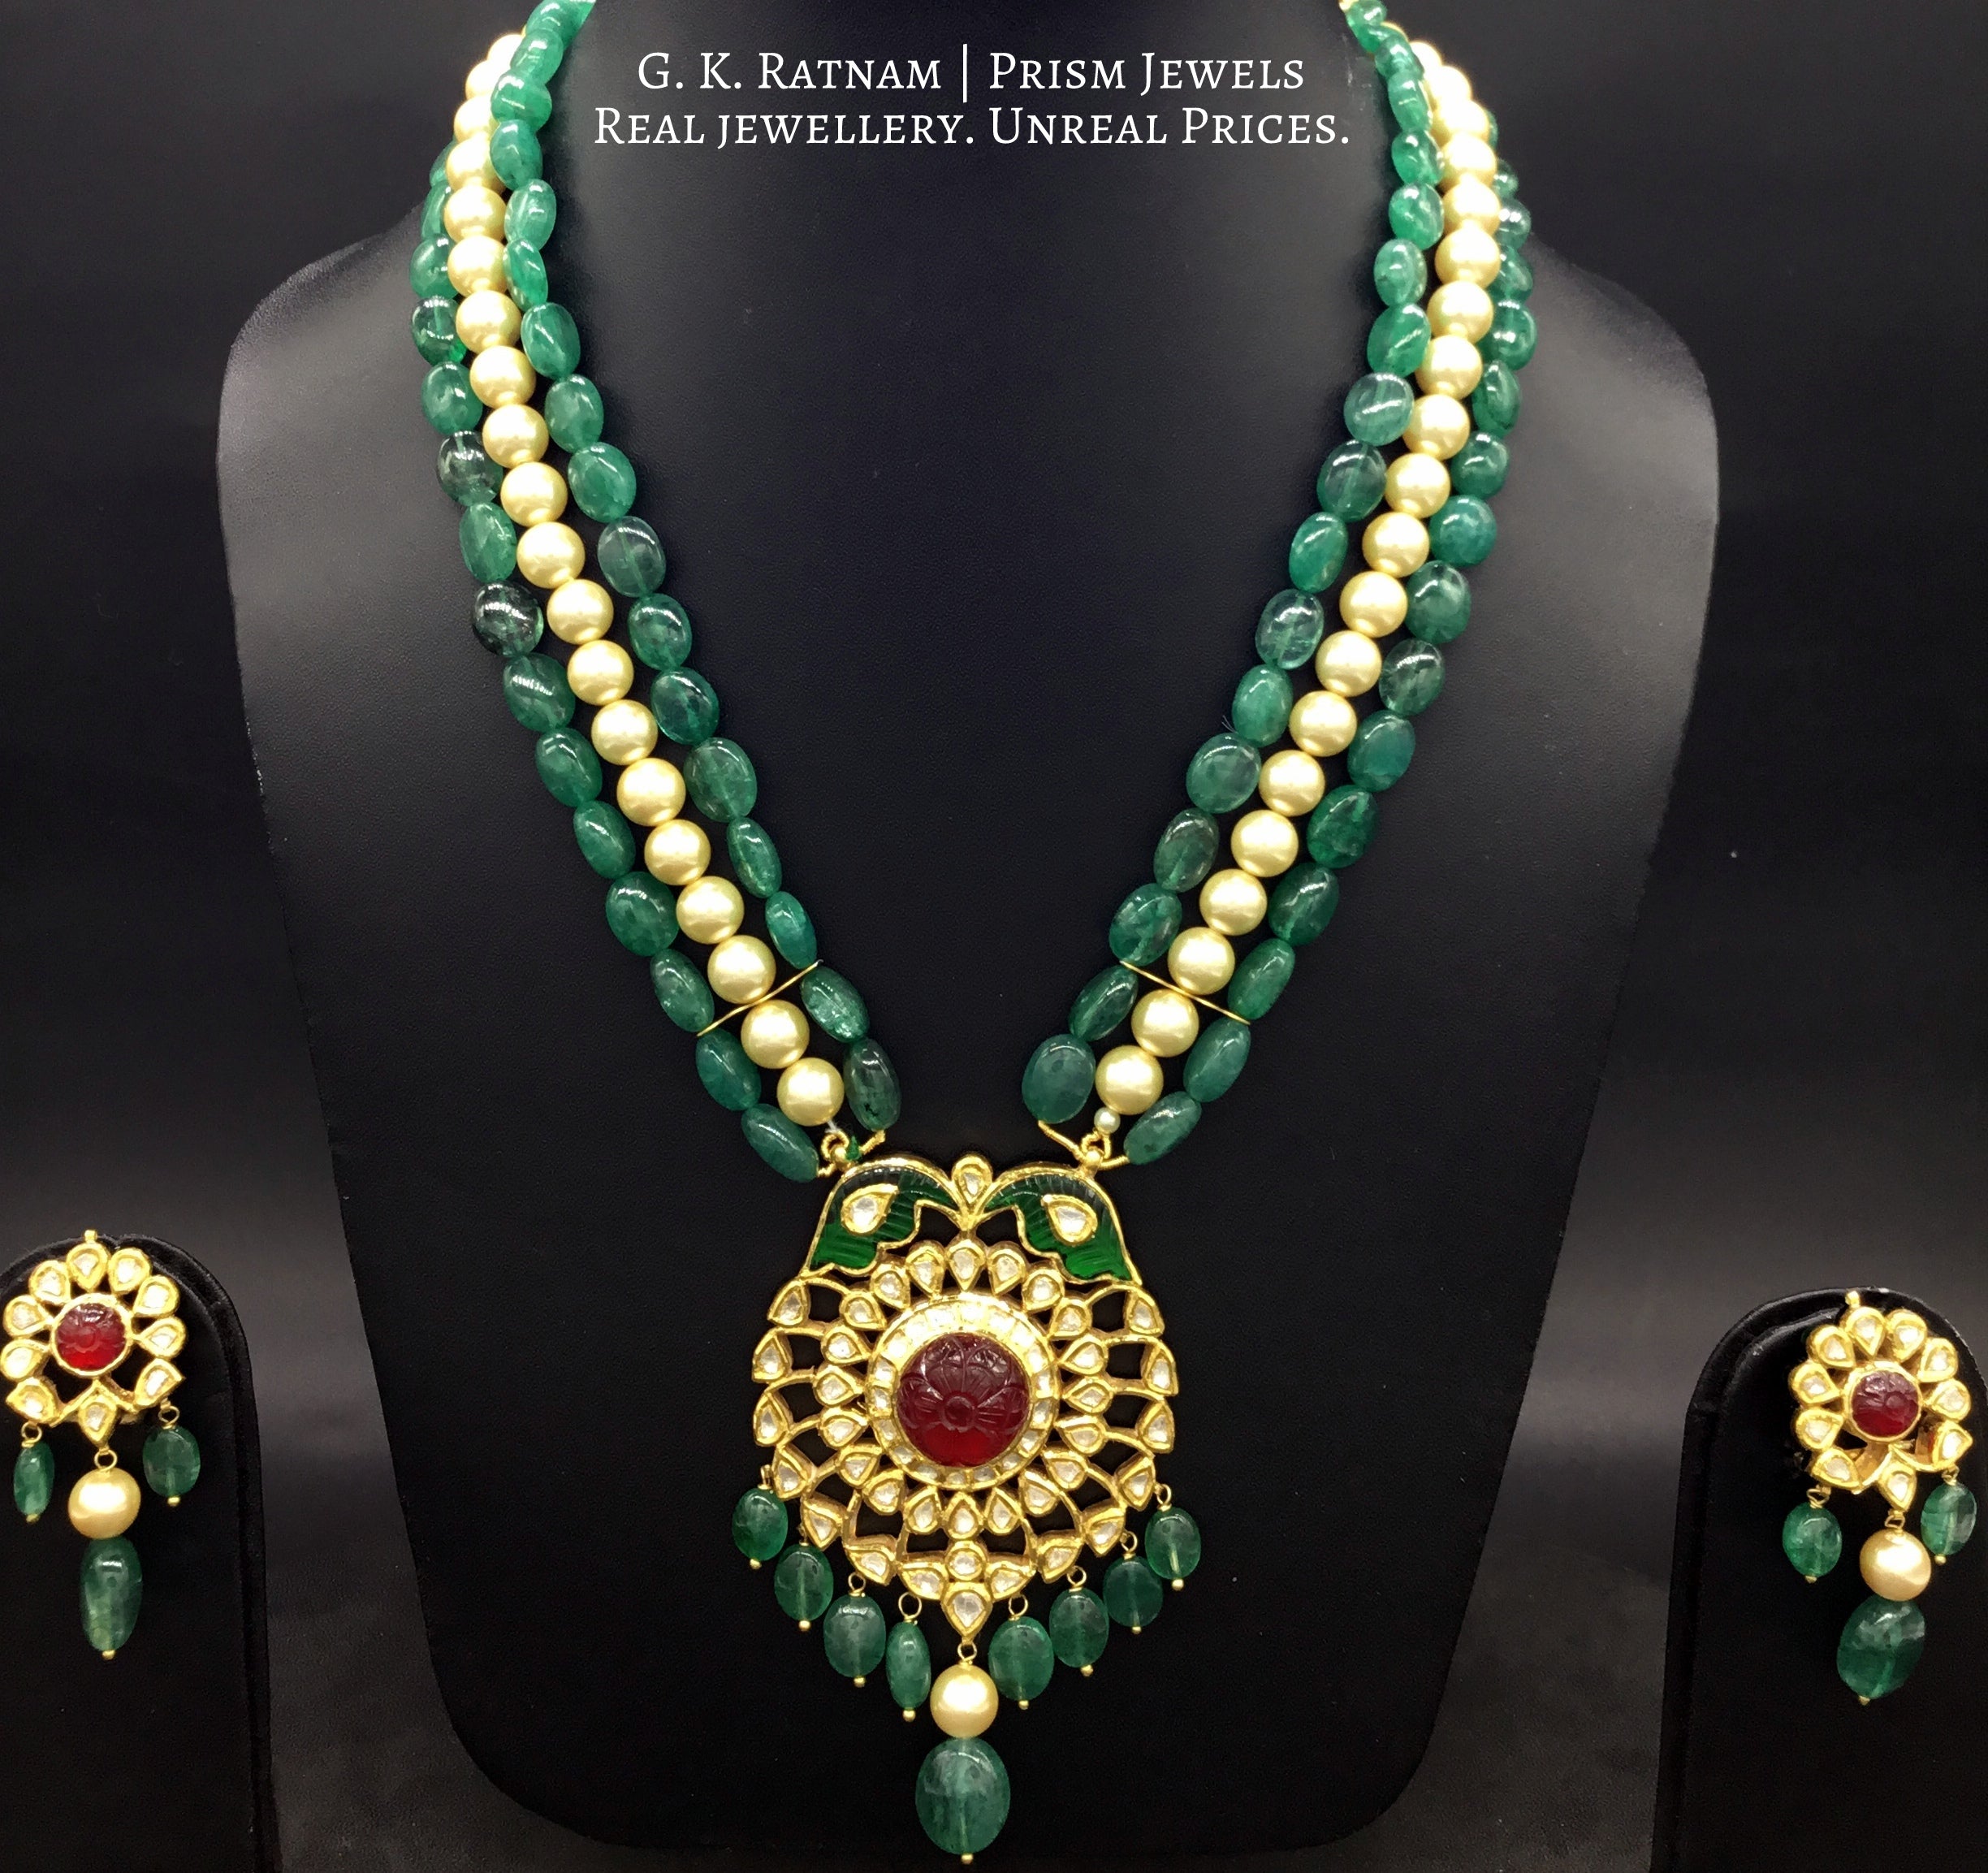 Traditional Gold and Diamond Polki carved-red-center Pendant Set with emerald-grade beryls and pearls - G. K. Ratnam